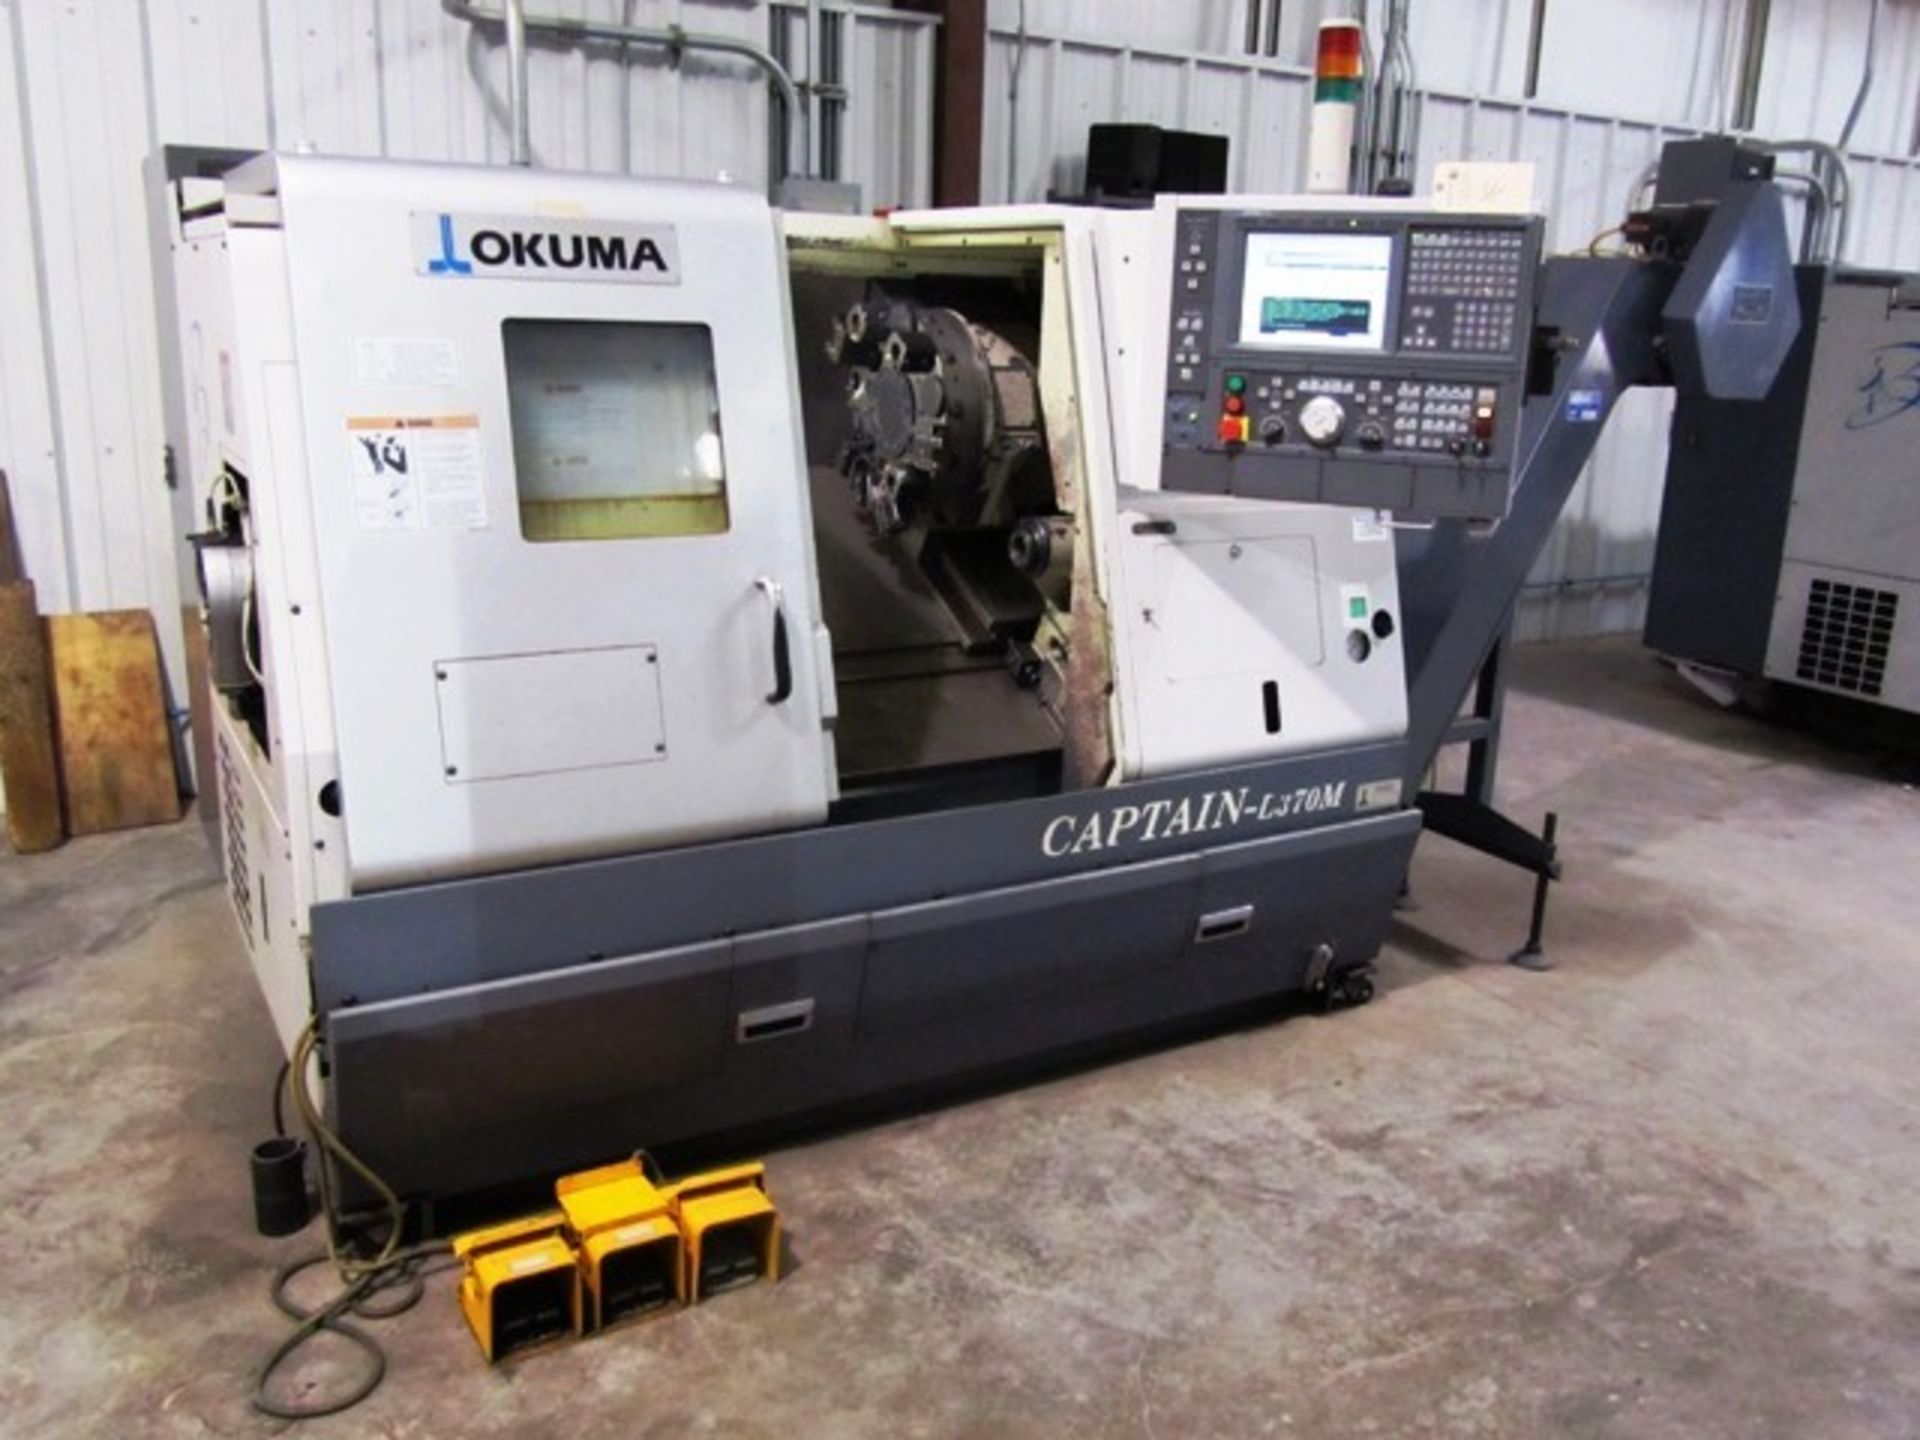 Okuma Model Captain L370M CNC Turning Center with Milling, `C' Axis, 12 Station Turret, 10'' 3-Jaw